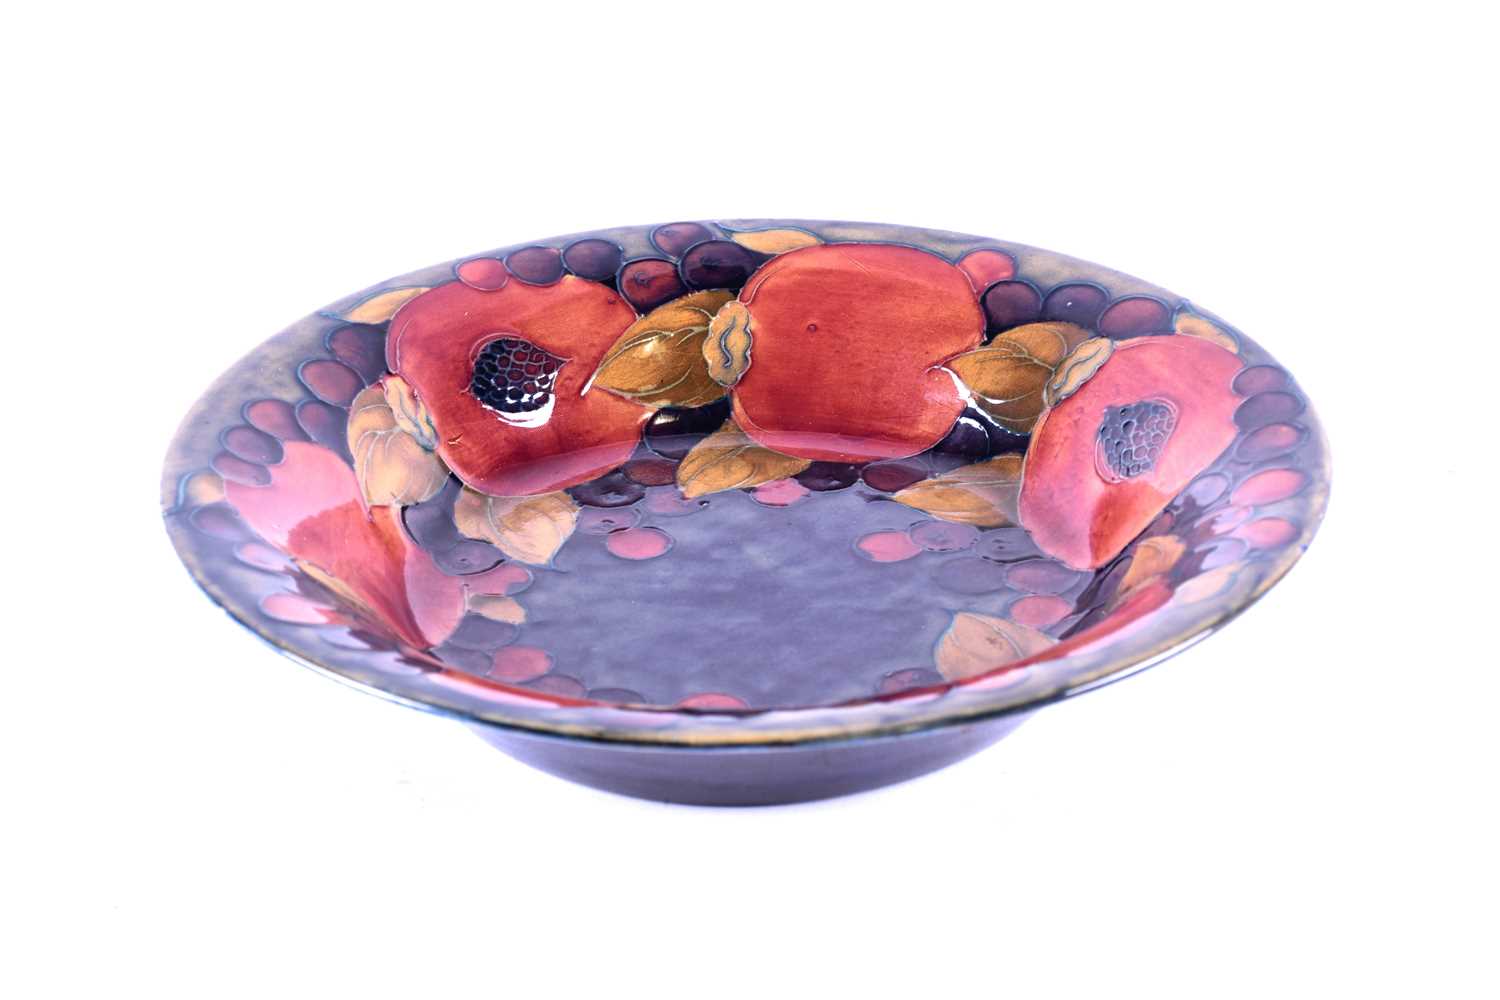 A William Moorcroft 'Pomegranate' bowl, circa 1930, the bowl decorated with leaves and berries